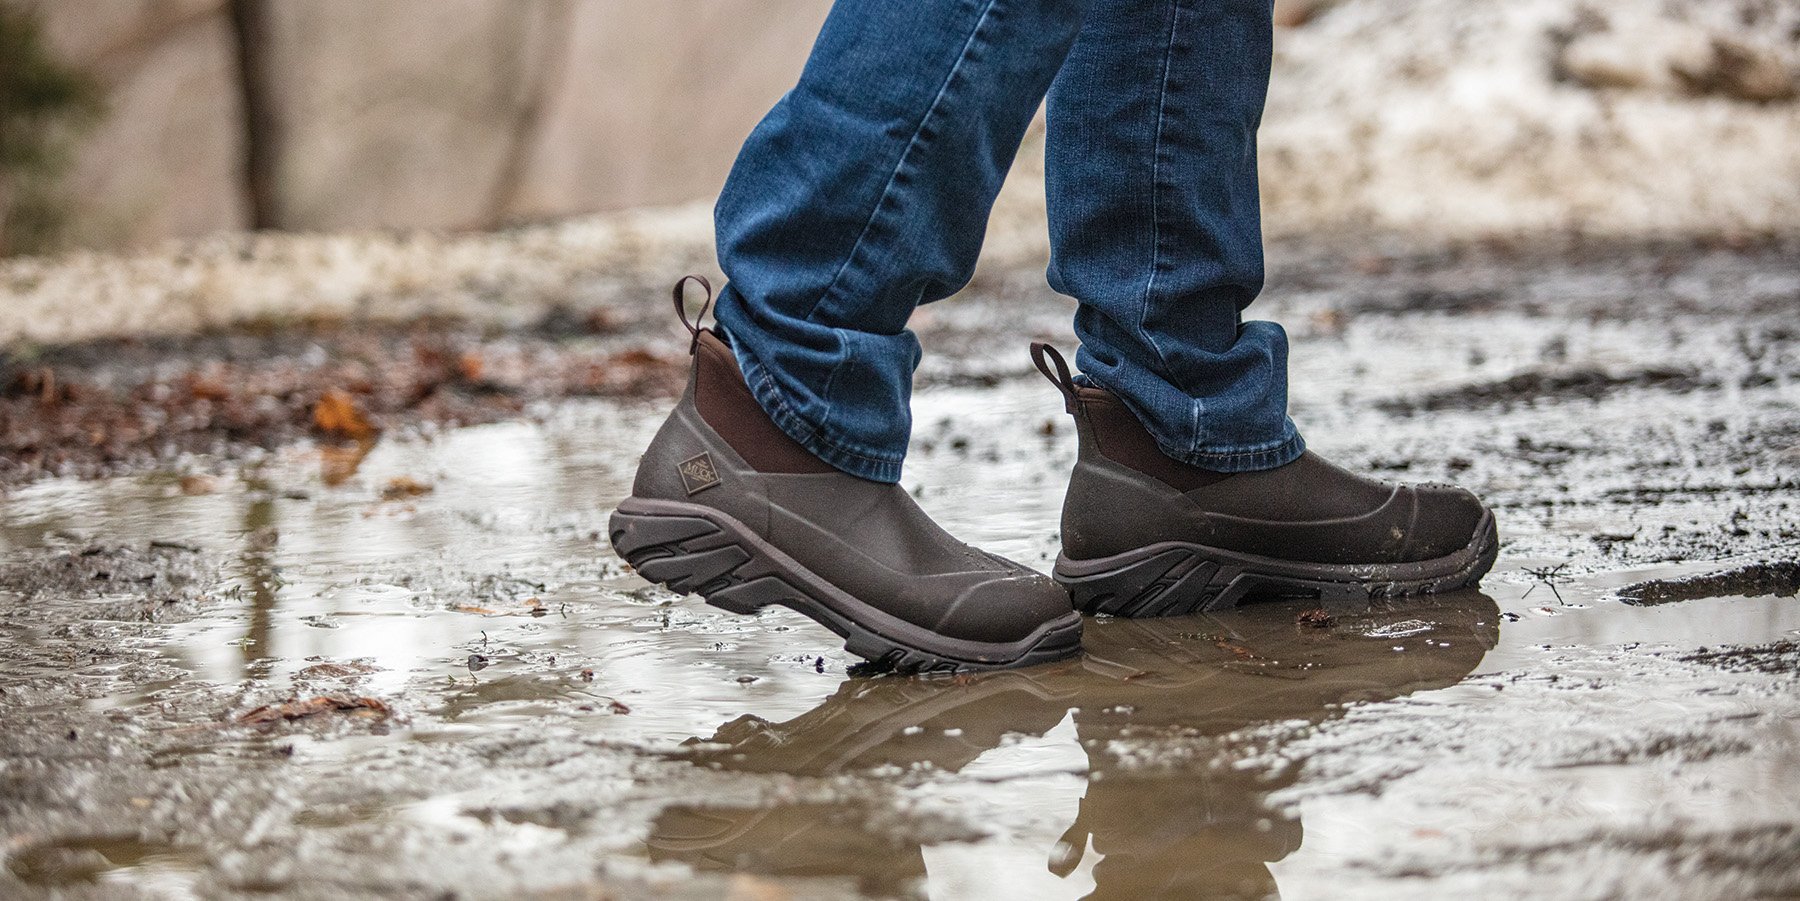 Muck Boot Company - Up to 70% Off Men’s Boots & Shoes